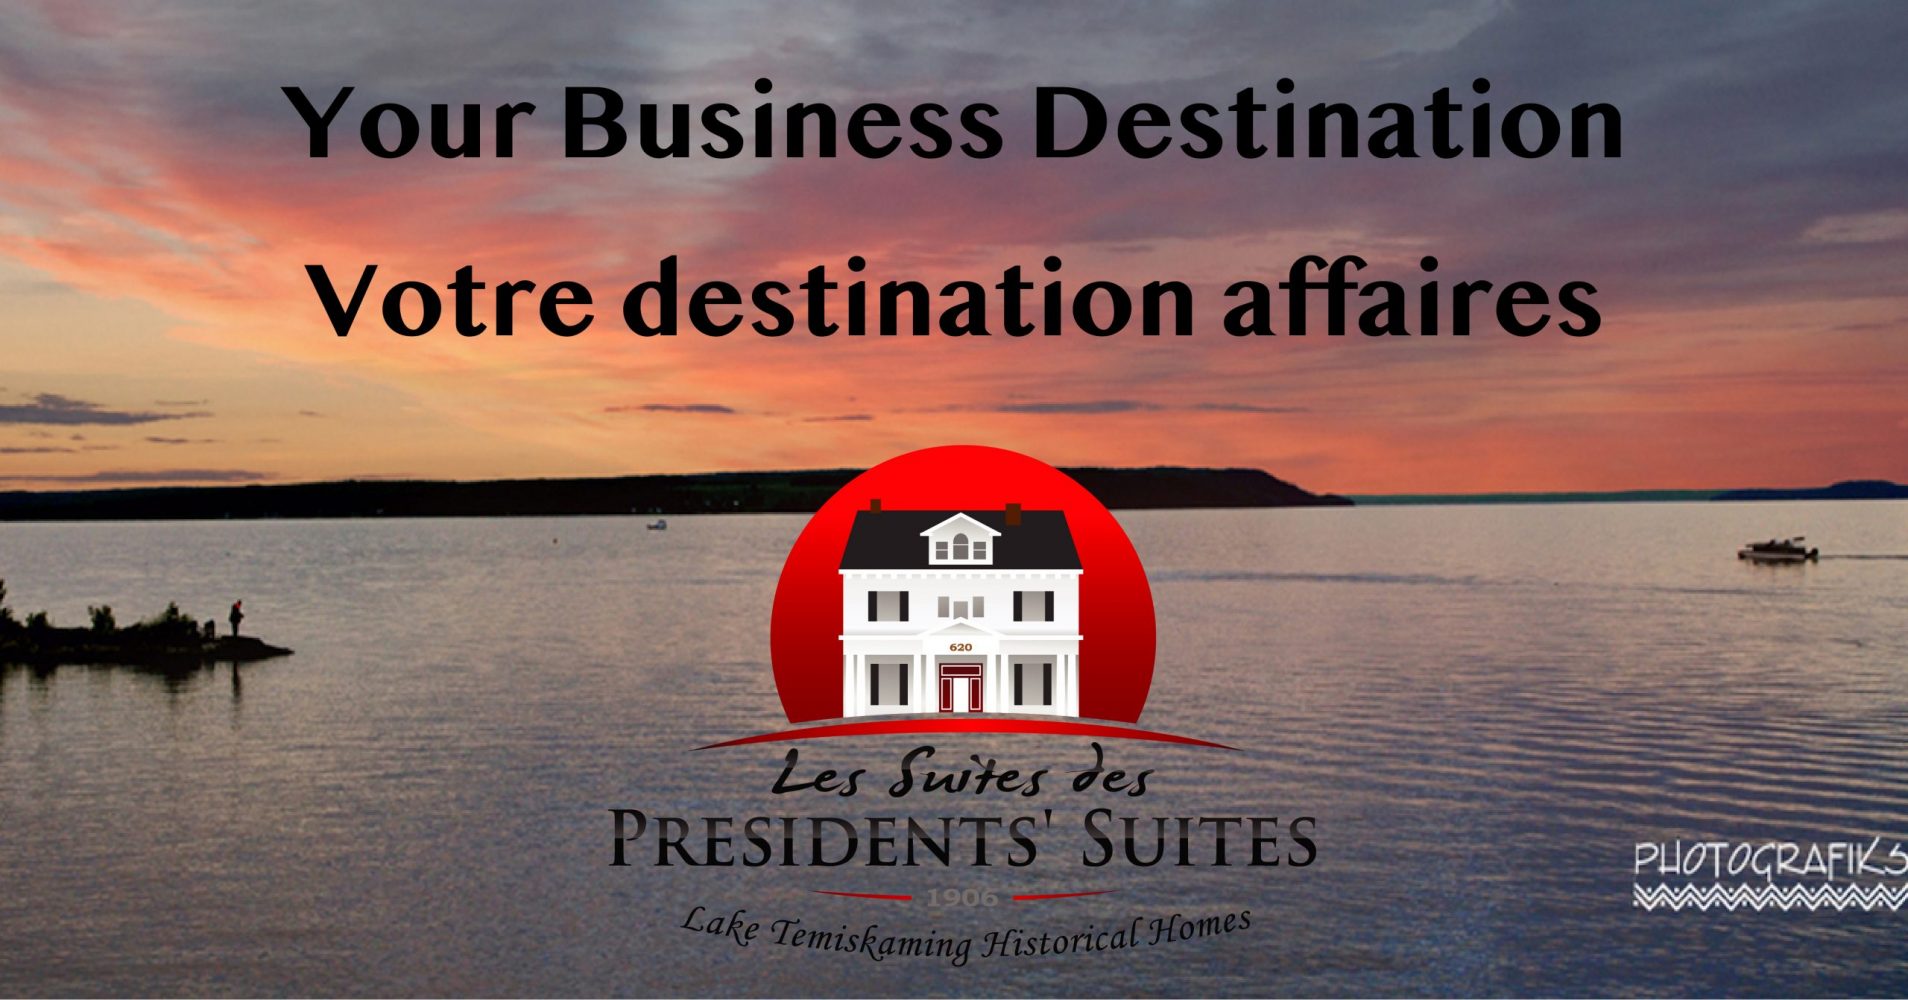 The Presidents' Suites is your business destination in the Temiskaming region